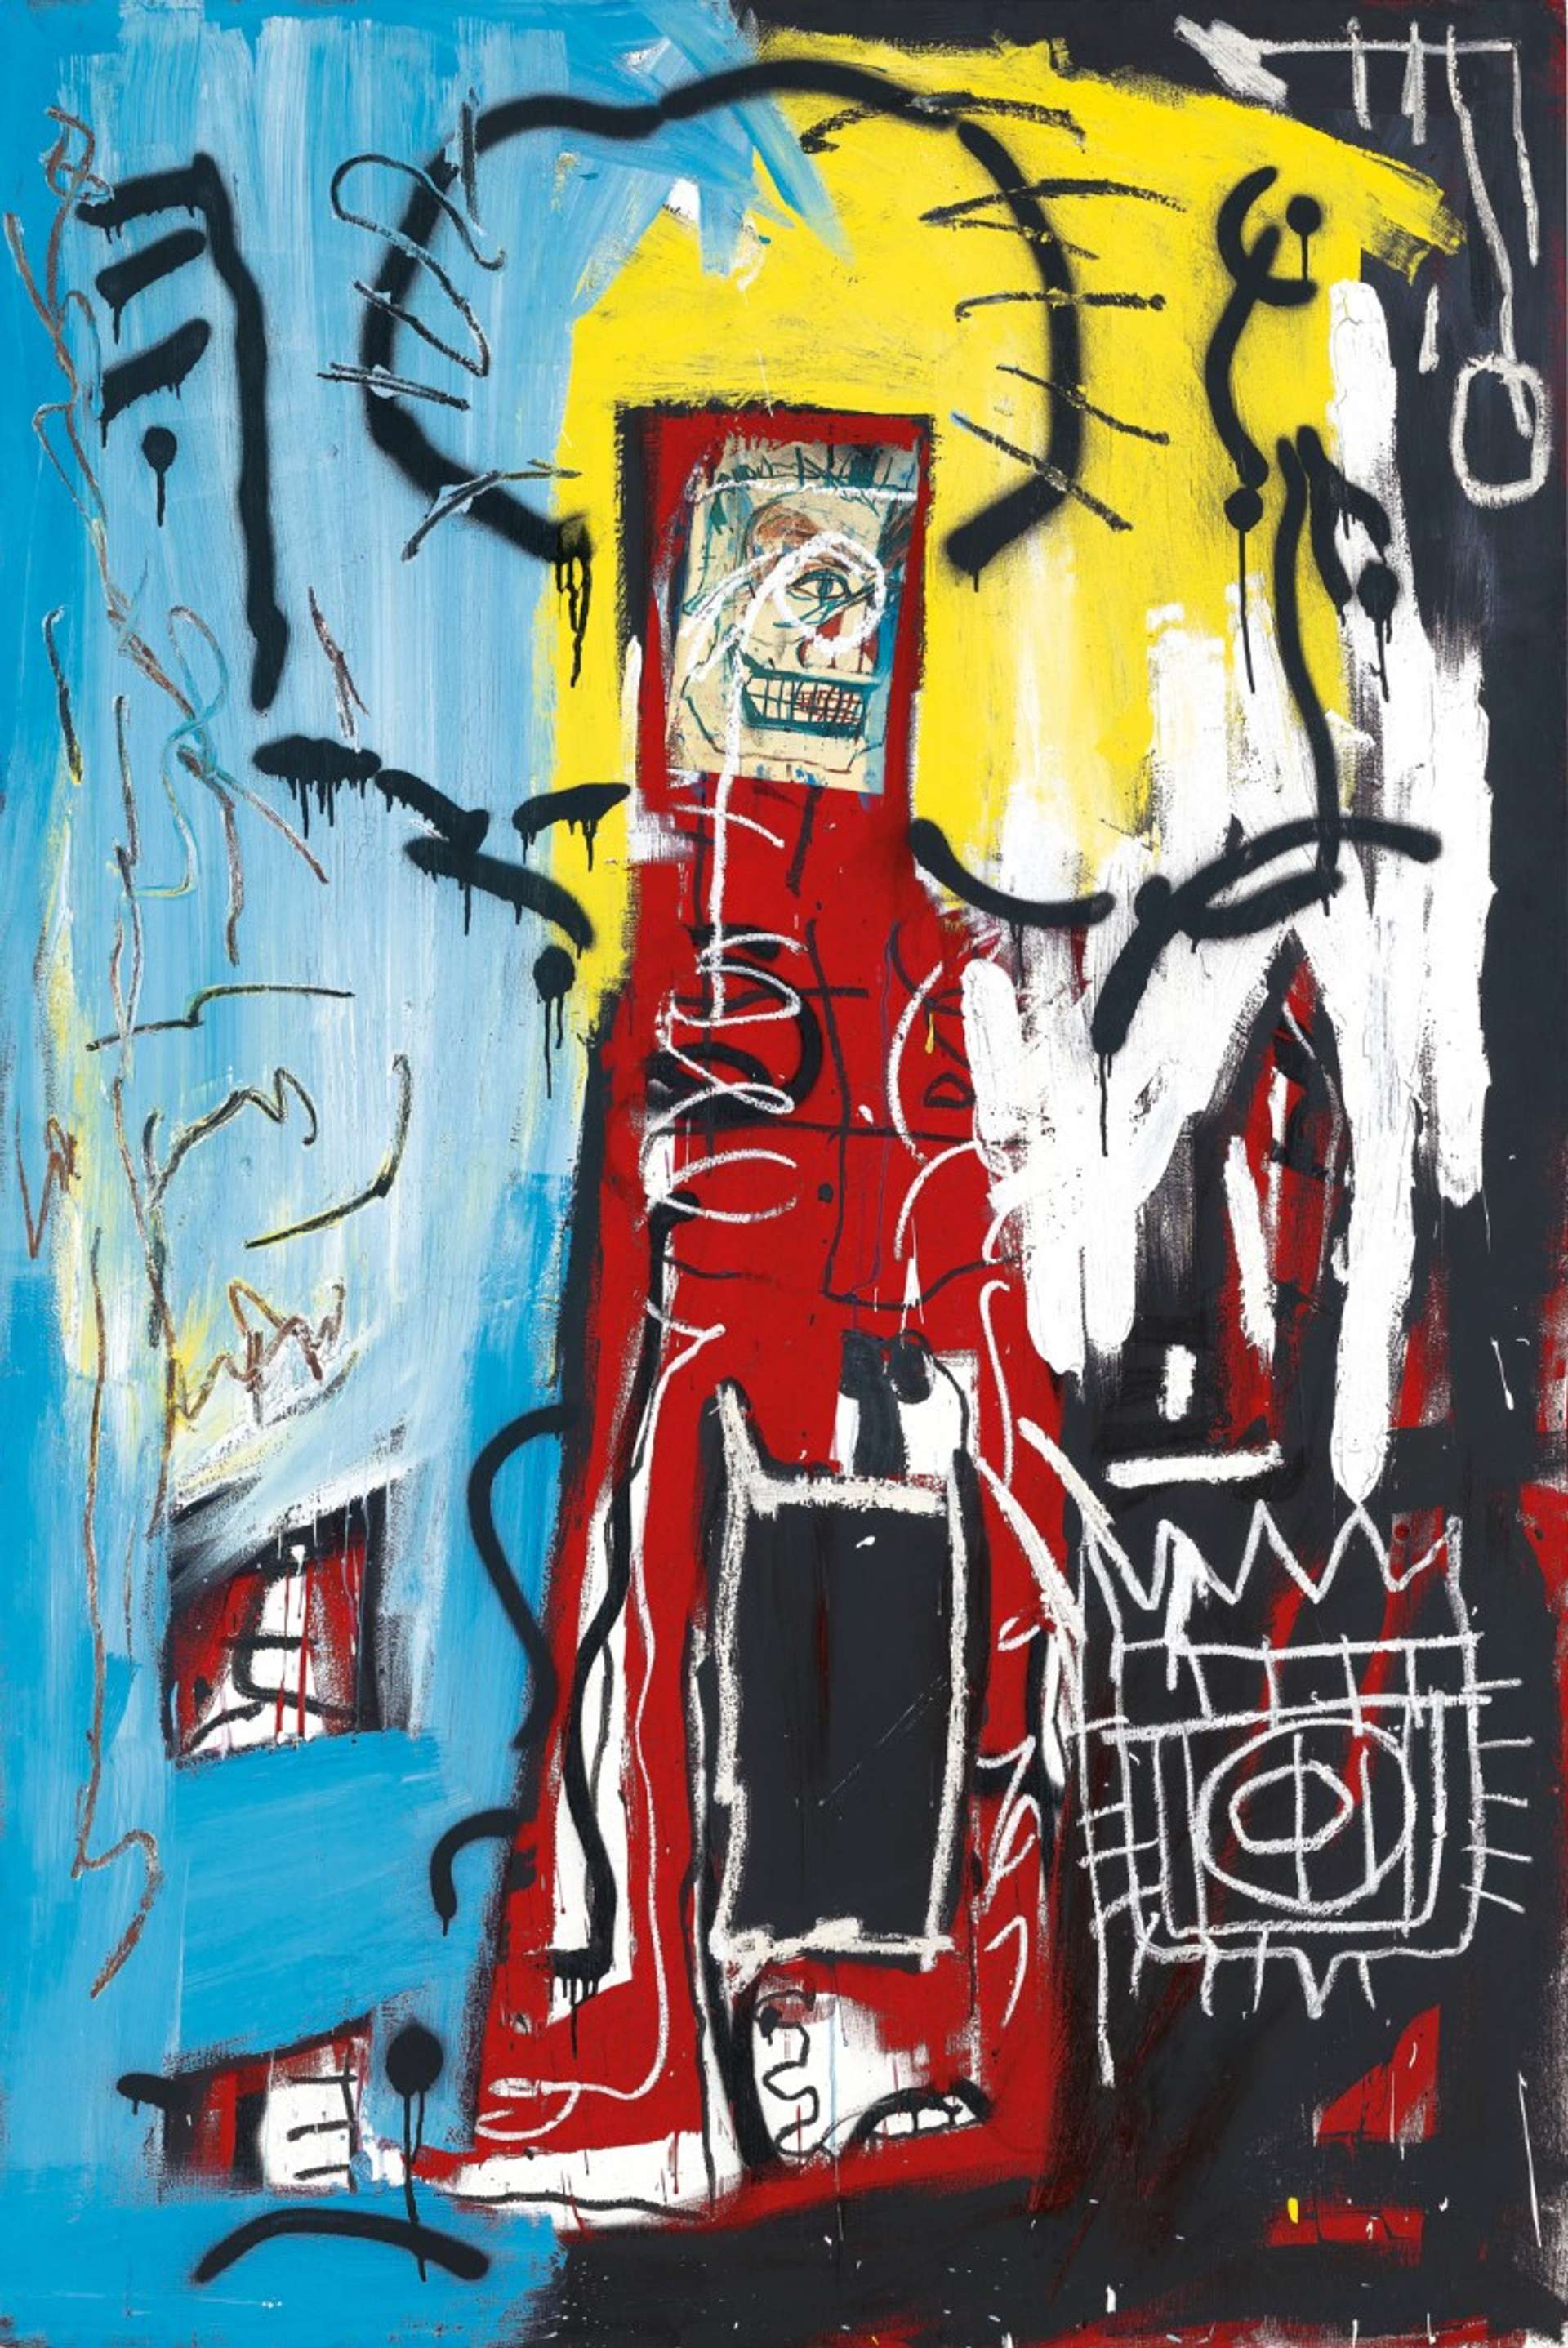 Untitled (One Eyed Man or Xerox Face) by Jean-Michel Basquiat